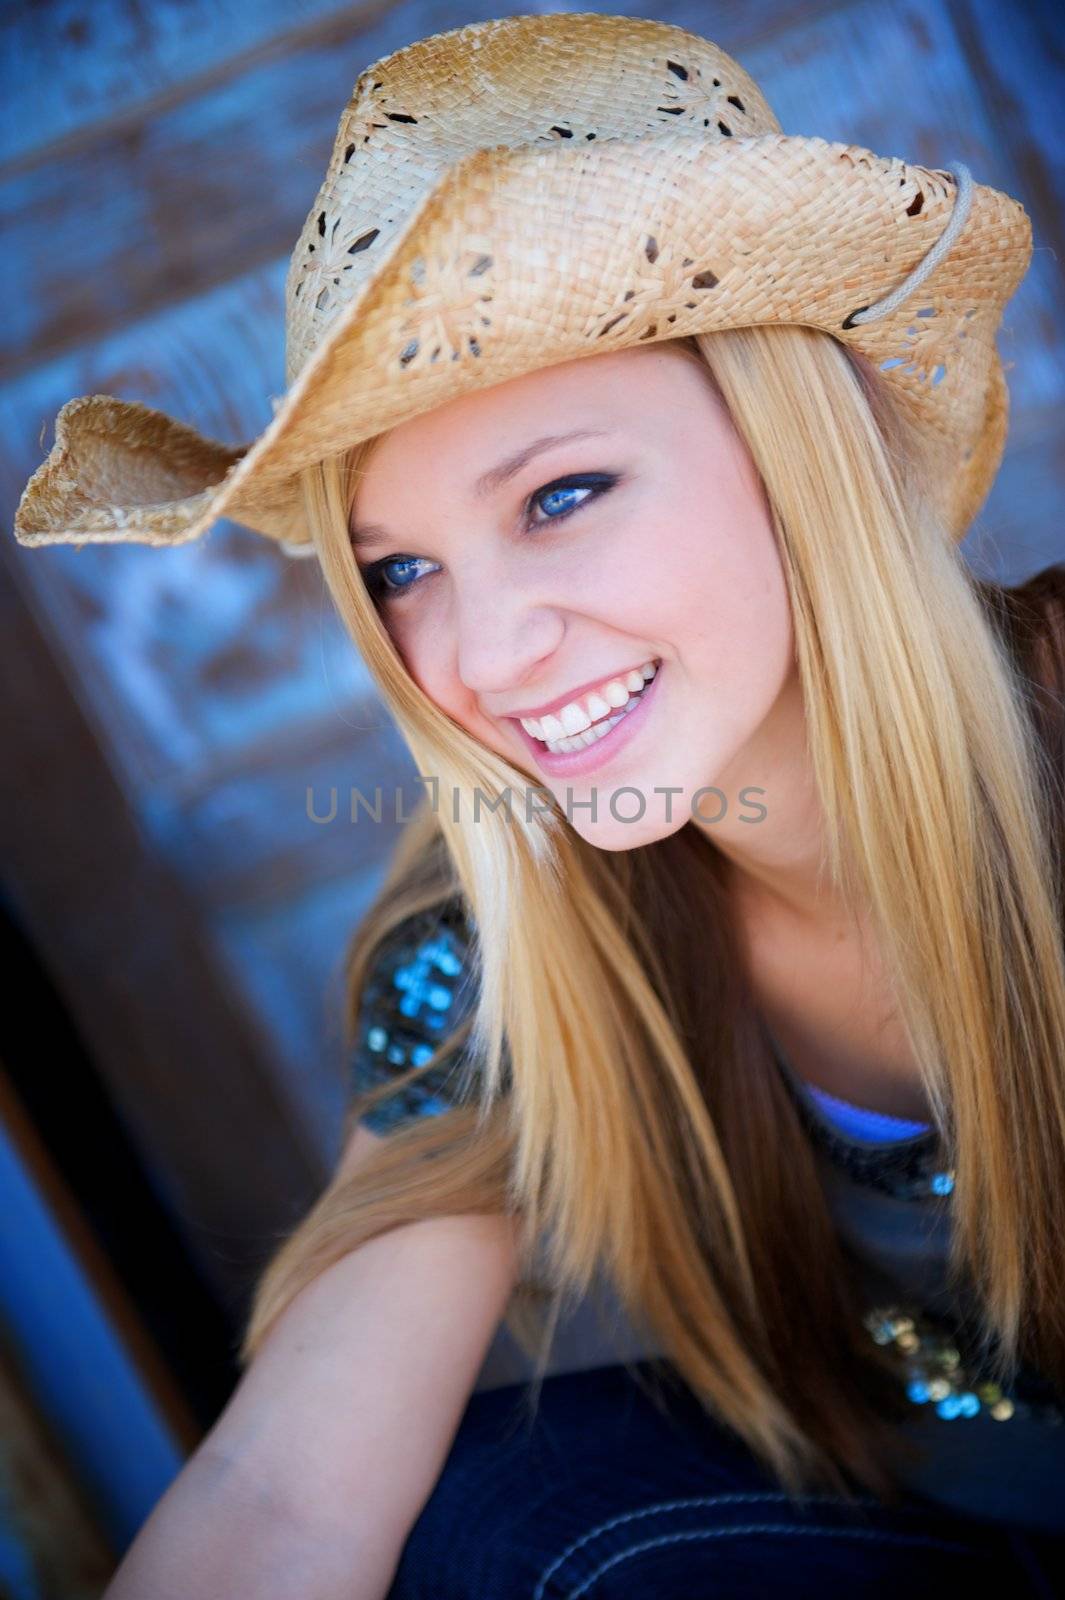 Attractive Blond Model Smiles While Wearing a Tattered Old Cowboy Hat